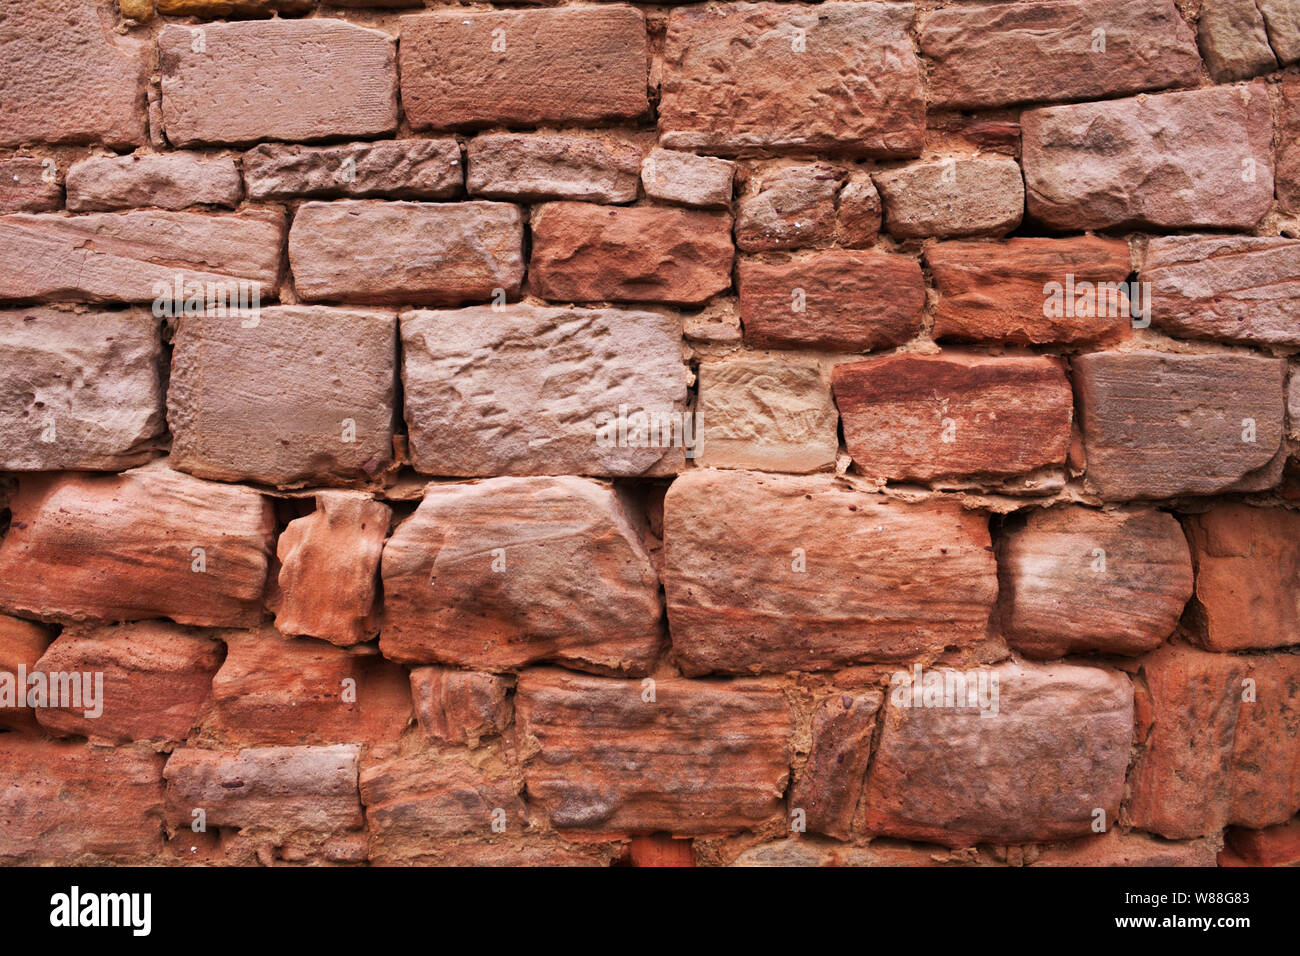 Brick Wall Texture – Free Seamless Textures - All rights reseved